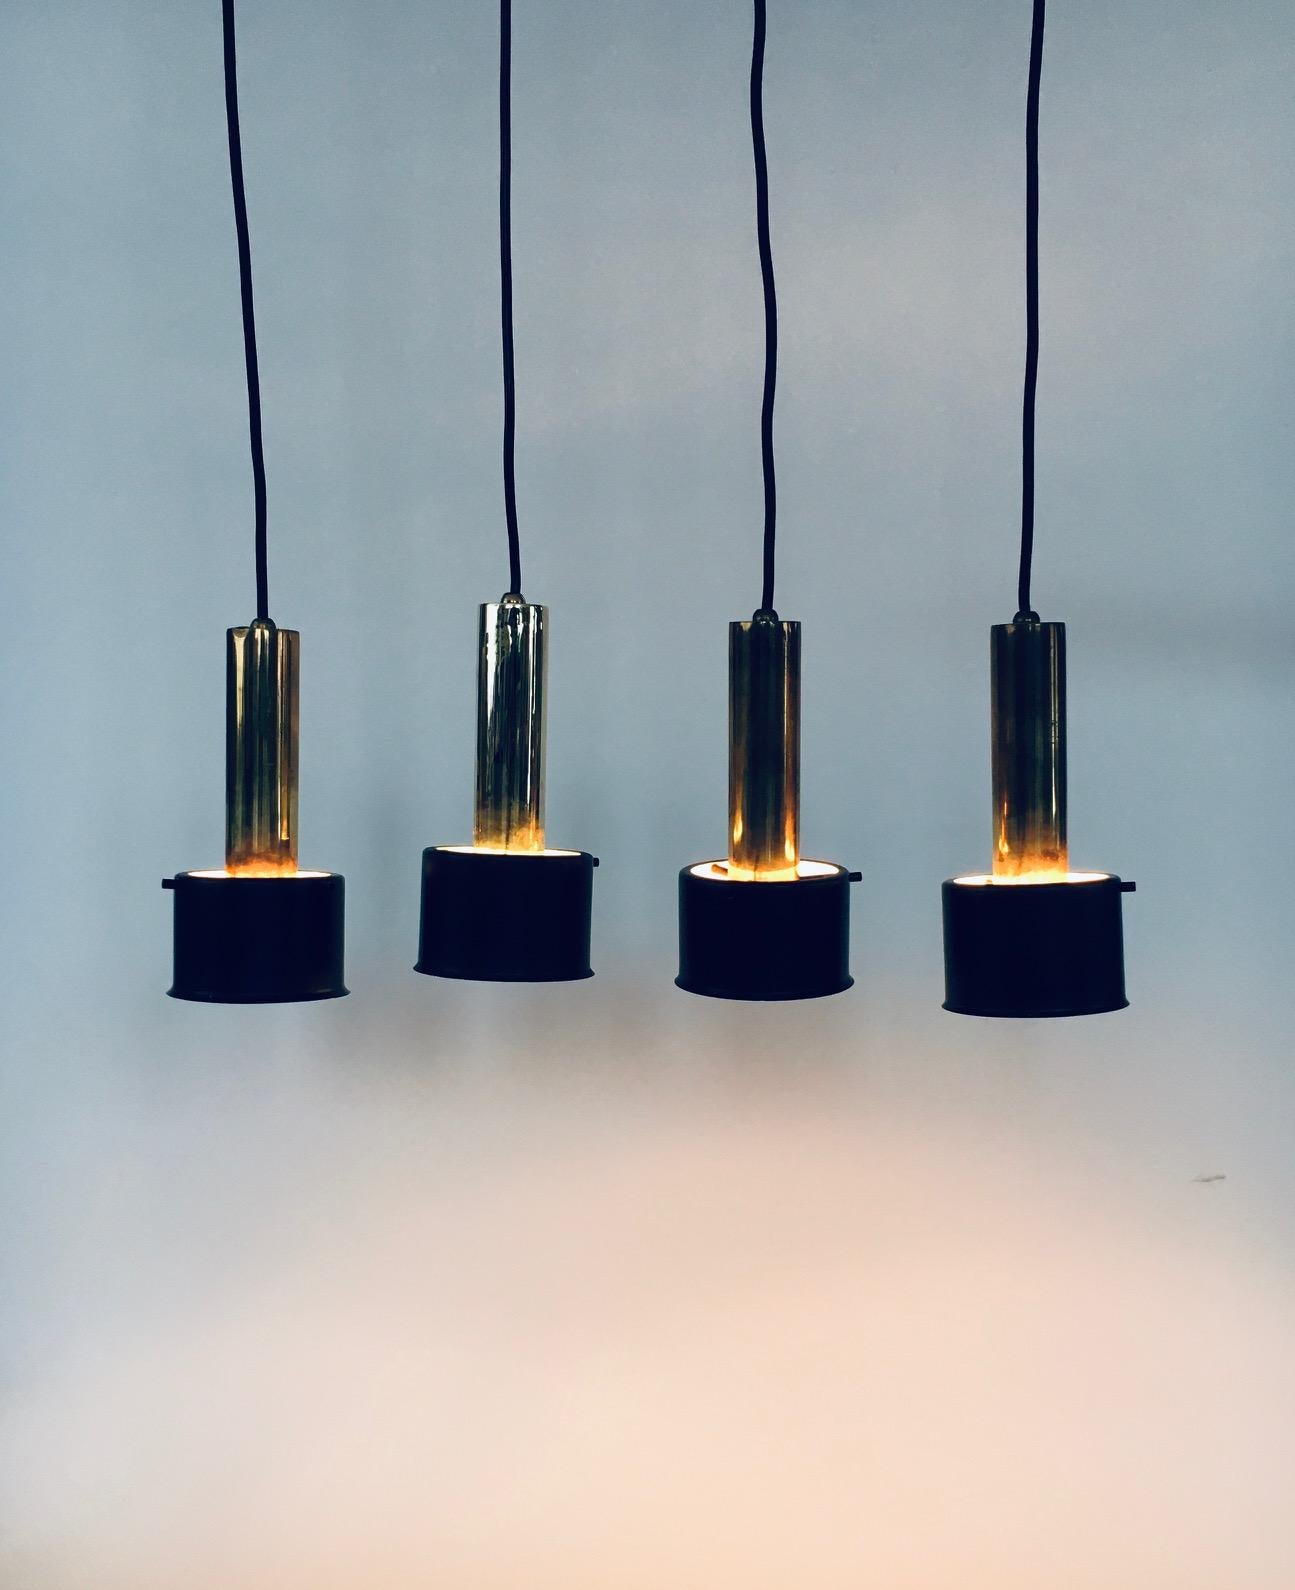 Vintage Midcentury Modern Italian Design Pendant Lamp set of 4. Made in Italy, 1960's. Attributed to Stilnovo. Not marked. Set of 4 pendant lamps in brass with a black metal shade. Timeless design. All come in good condition, with marks of their age